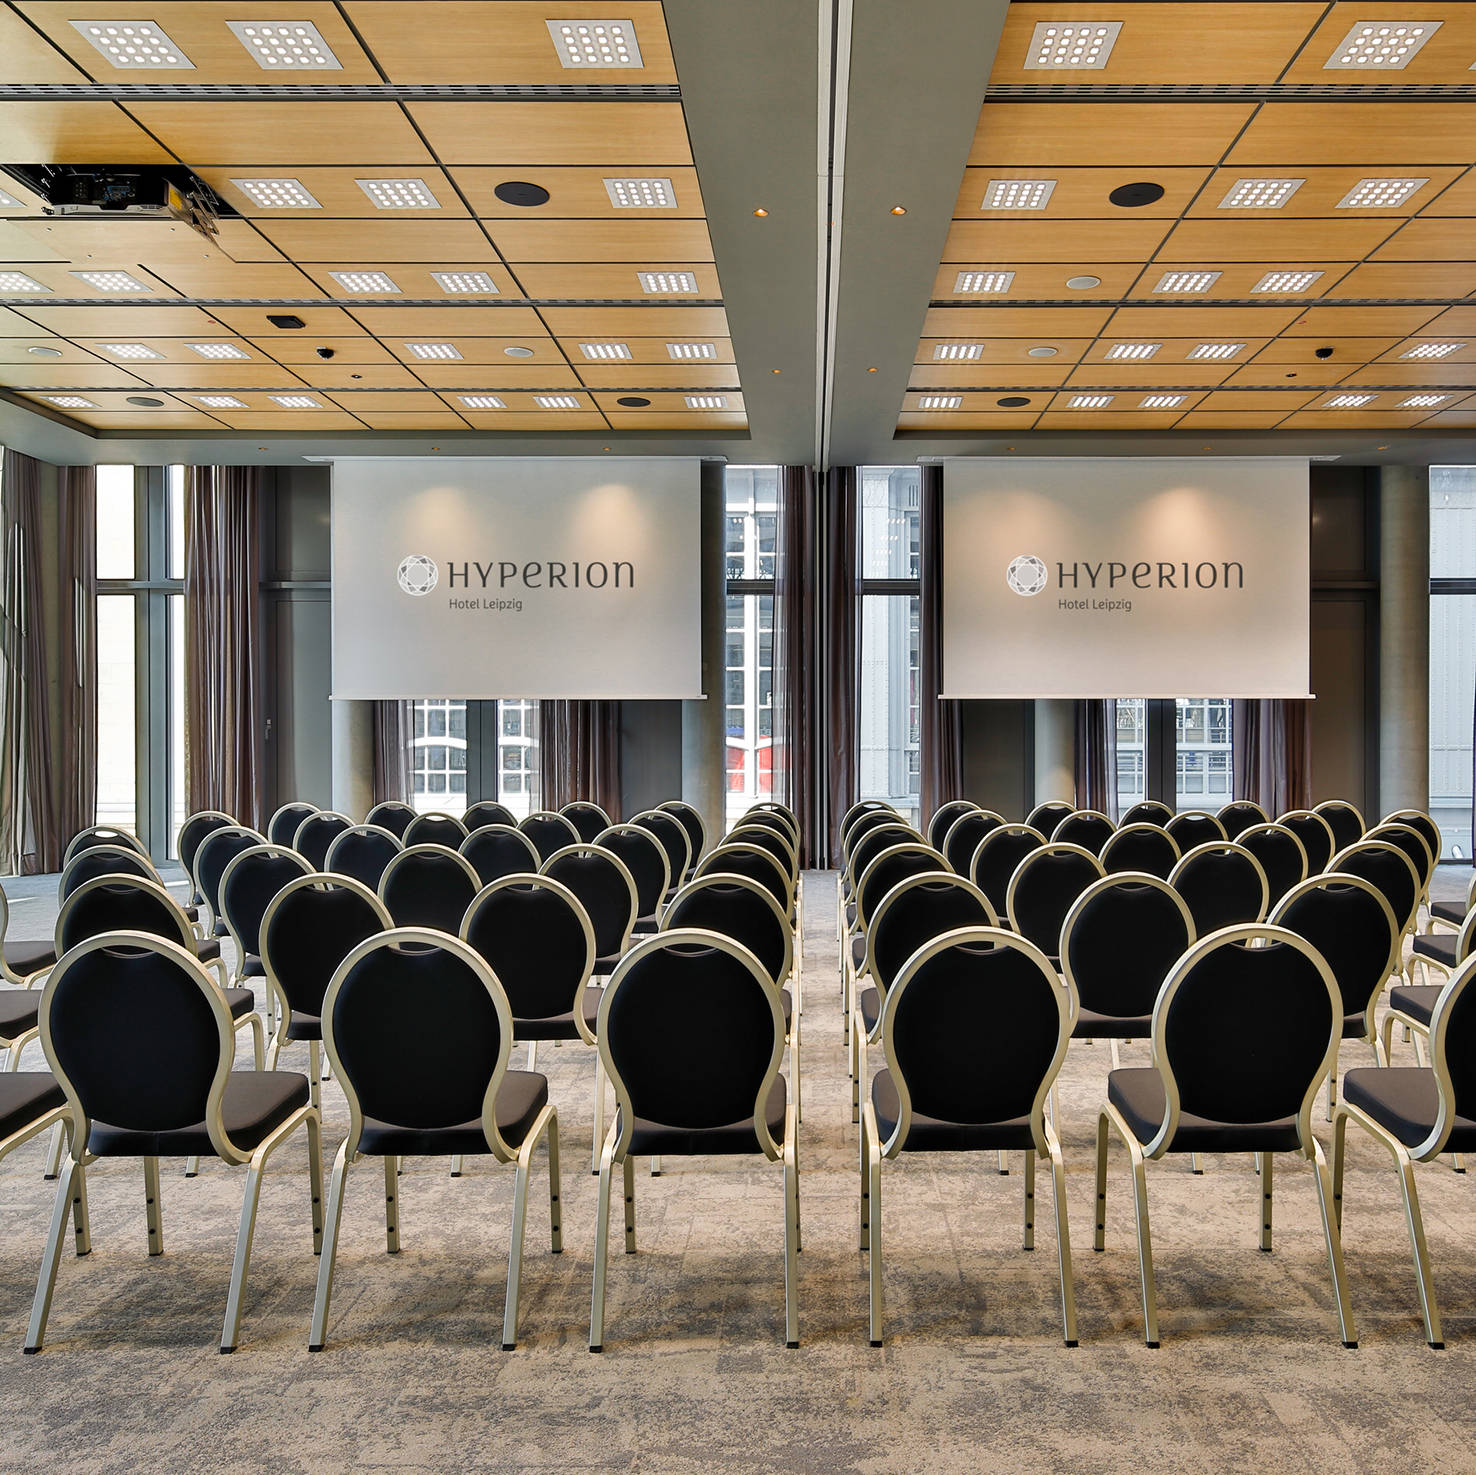 Modern meeting rooms - HYPERION Hotel Leipzig - Official website